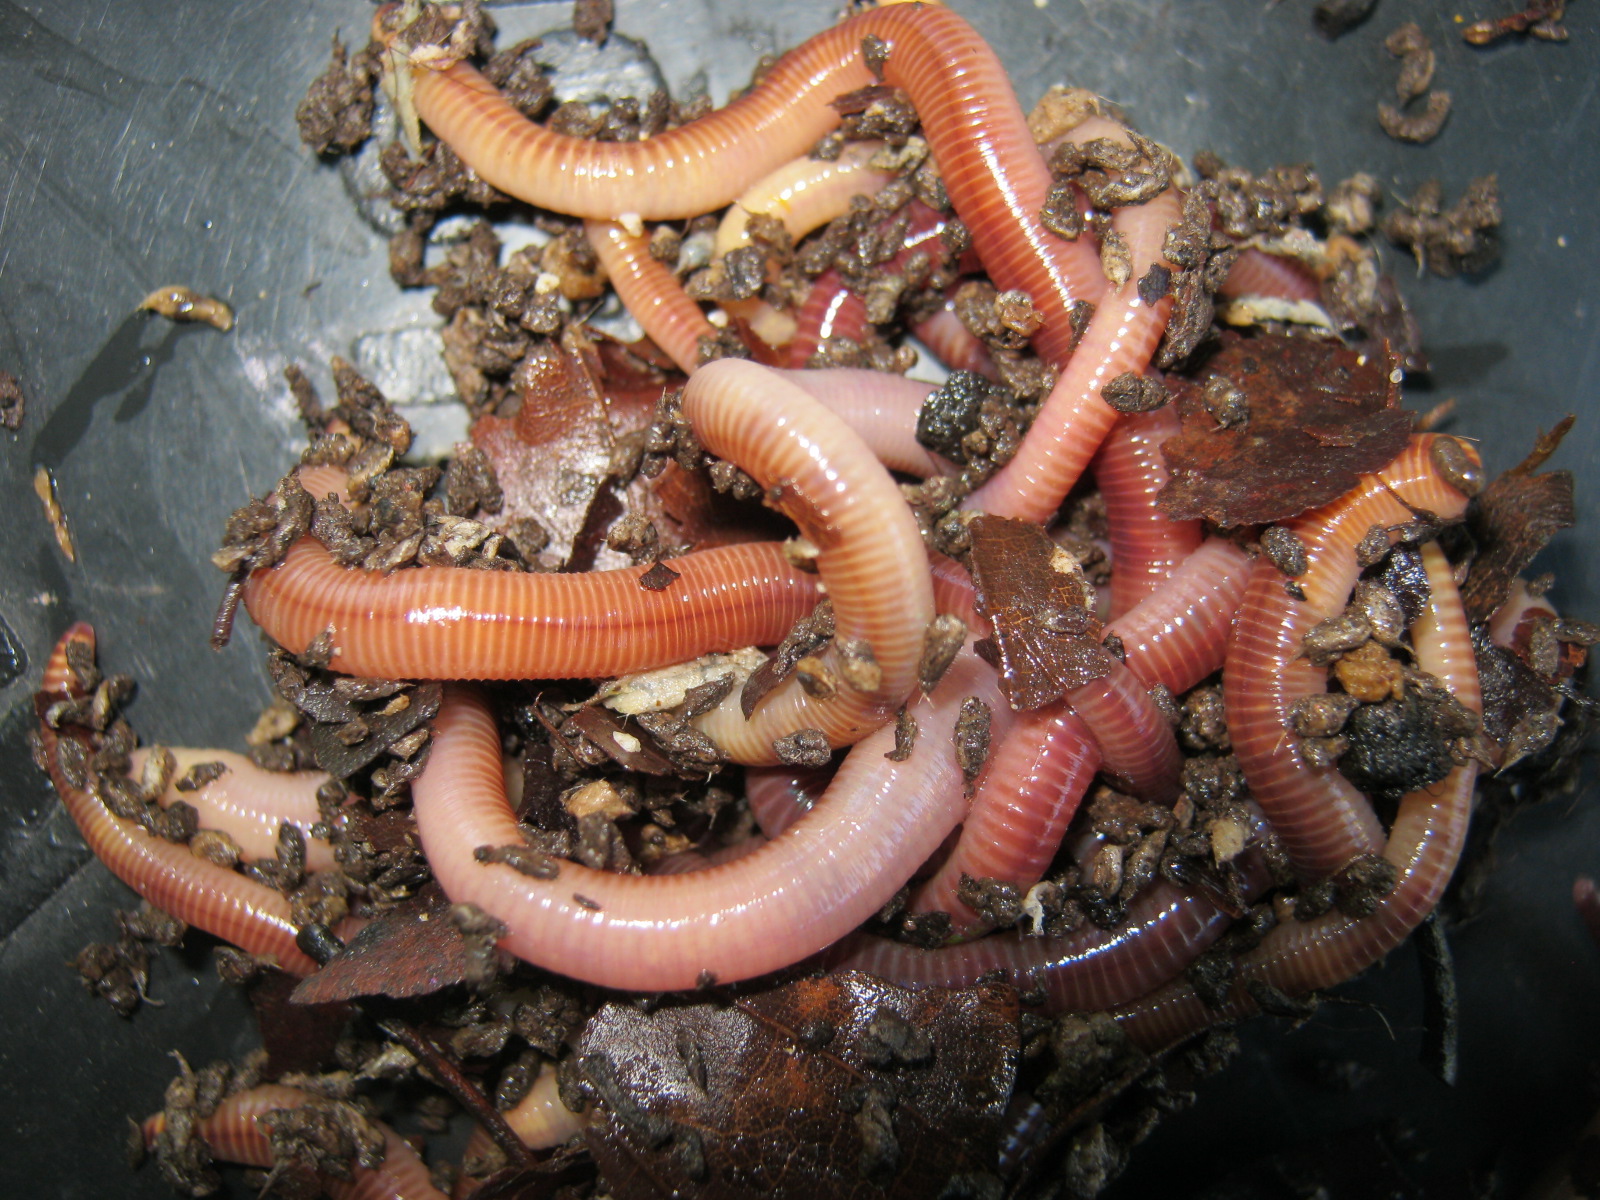 Compost worms convert dog poop and kitchen waste into nutrient rich soil conditioner (odor free)